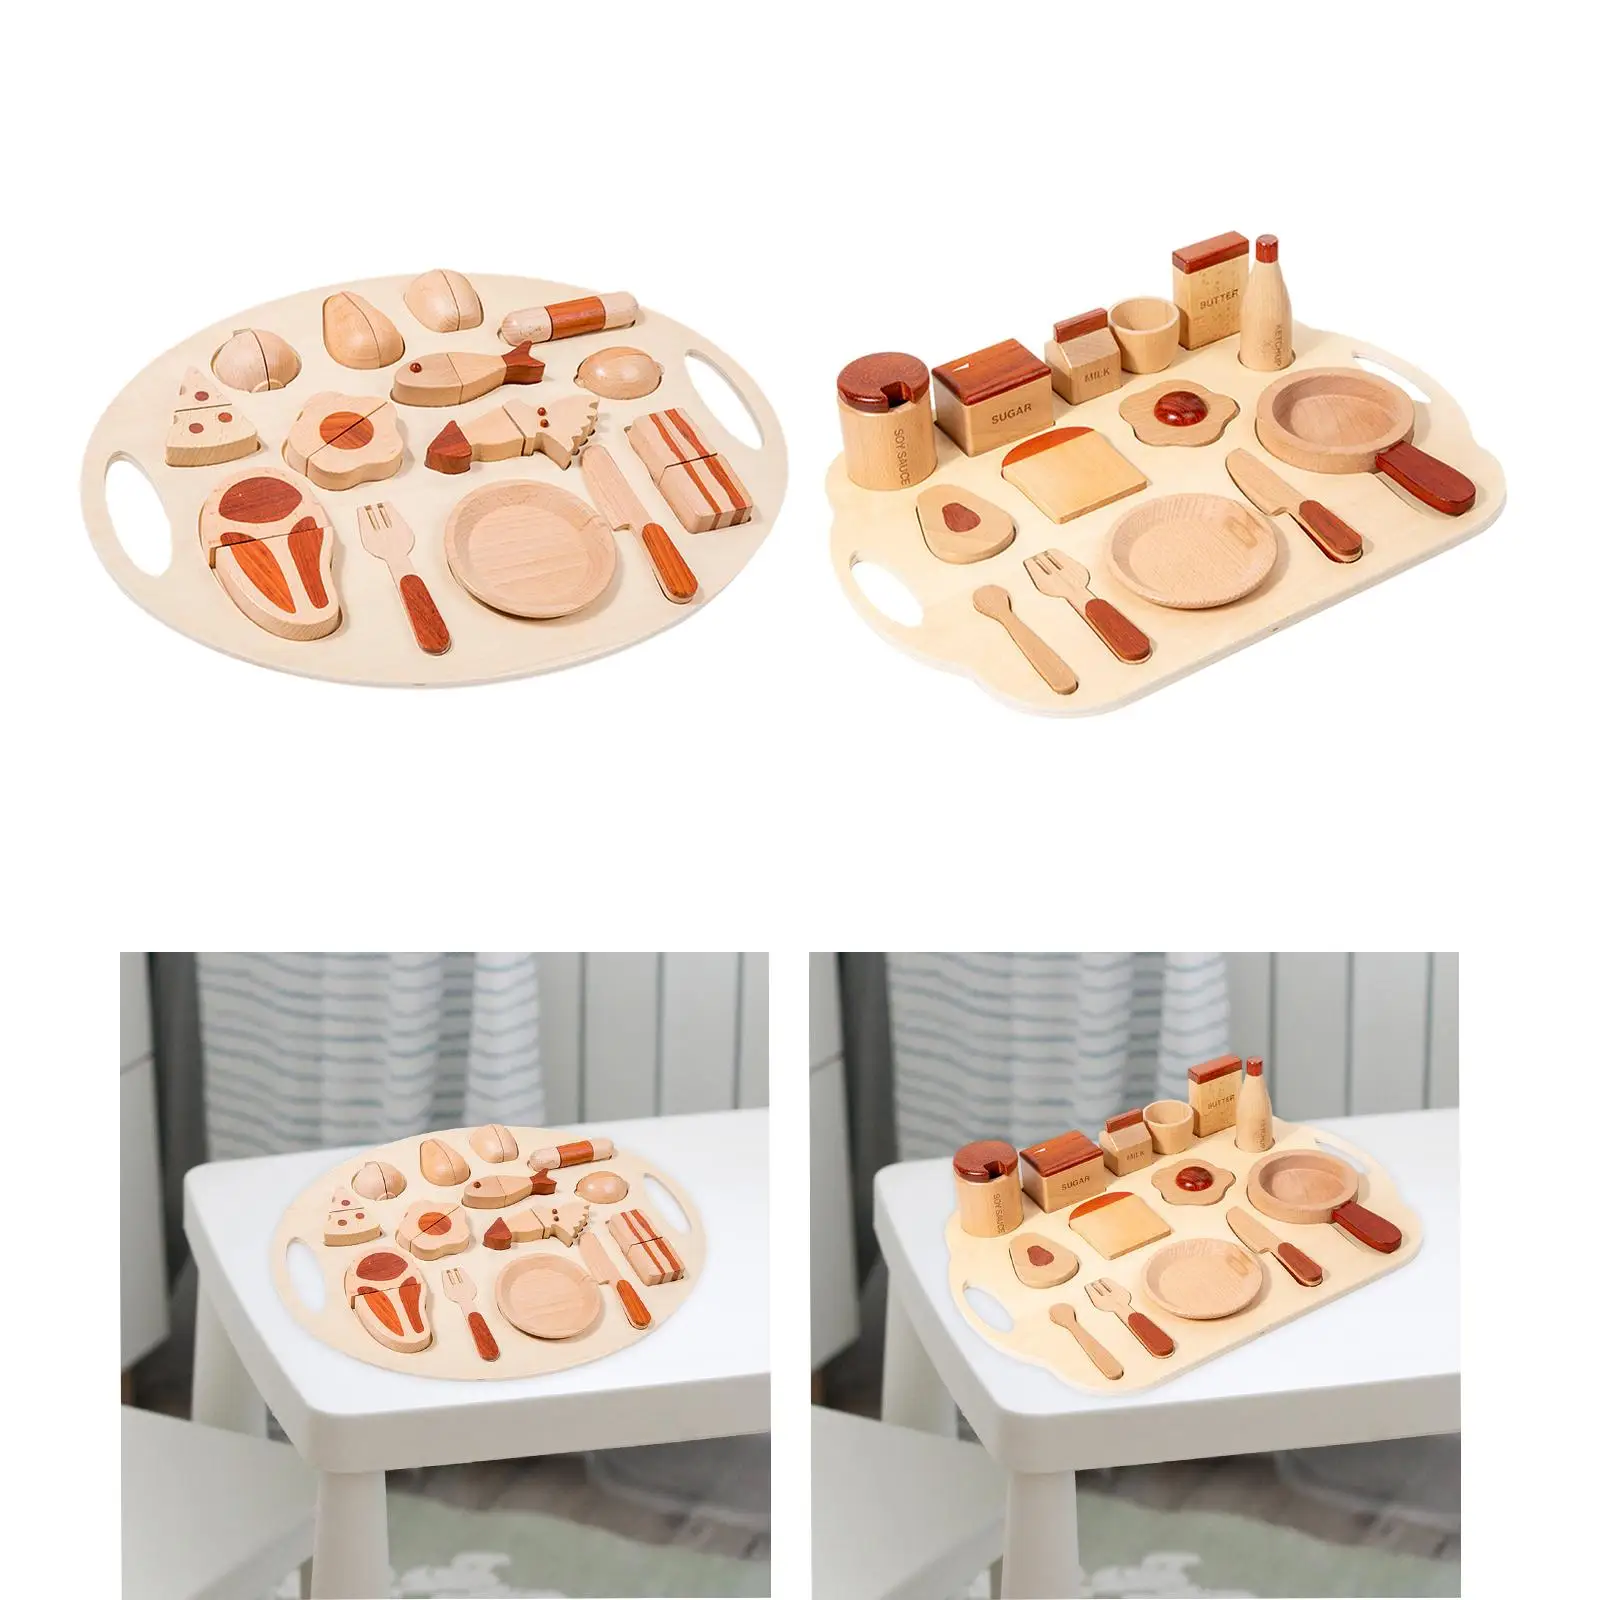 15x Kitchen Accessories Pretend Play Wooden Food Sets for Toddlers Children